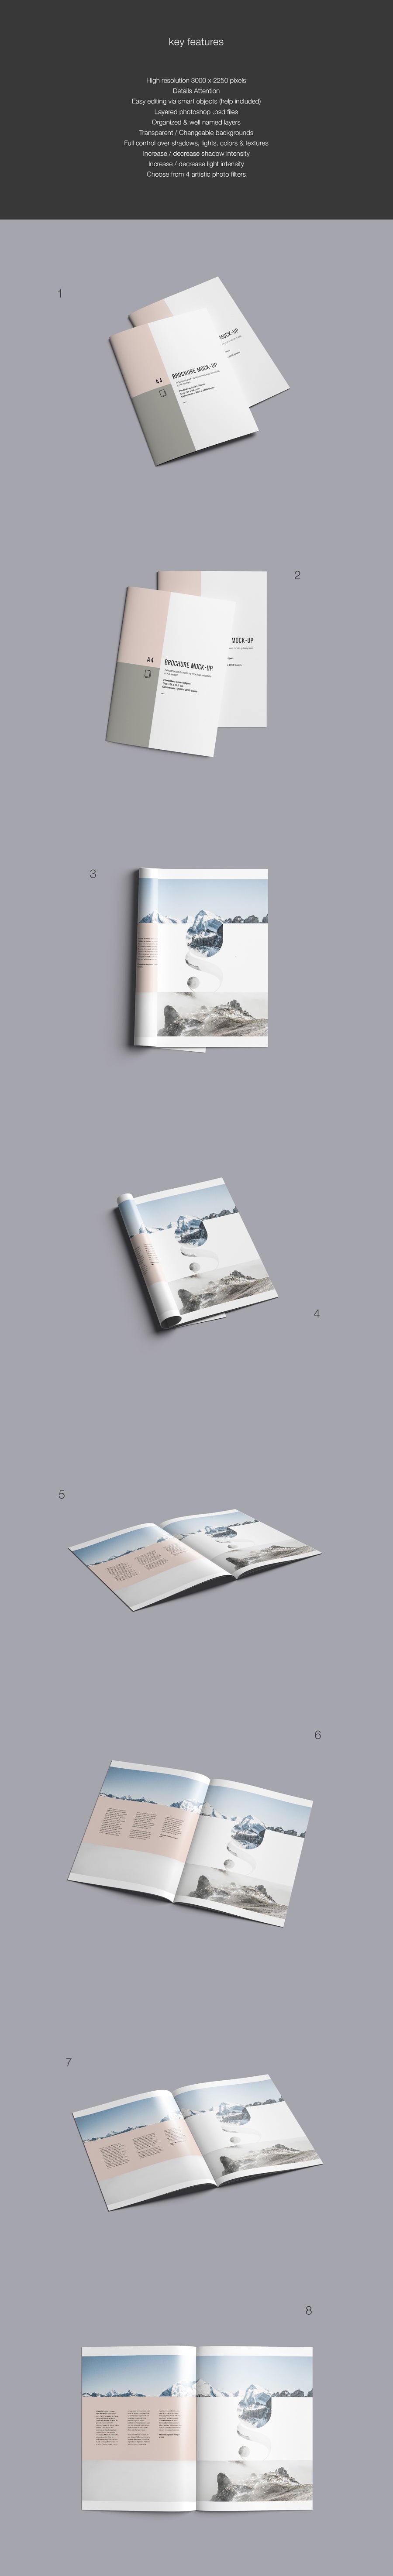 Free 16 Different Perspectives of A4 Brochure Mockup